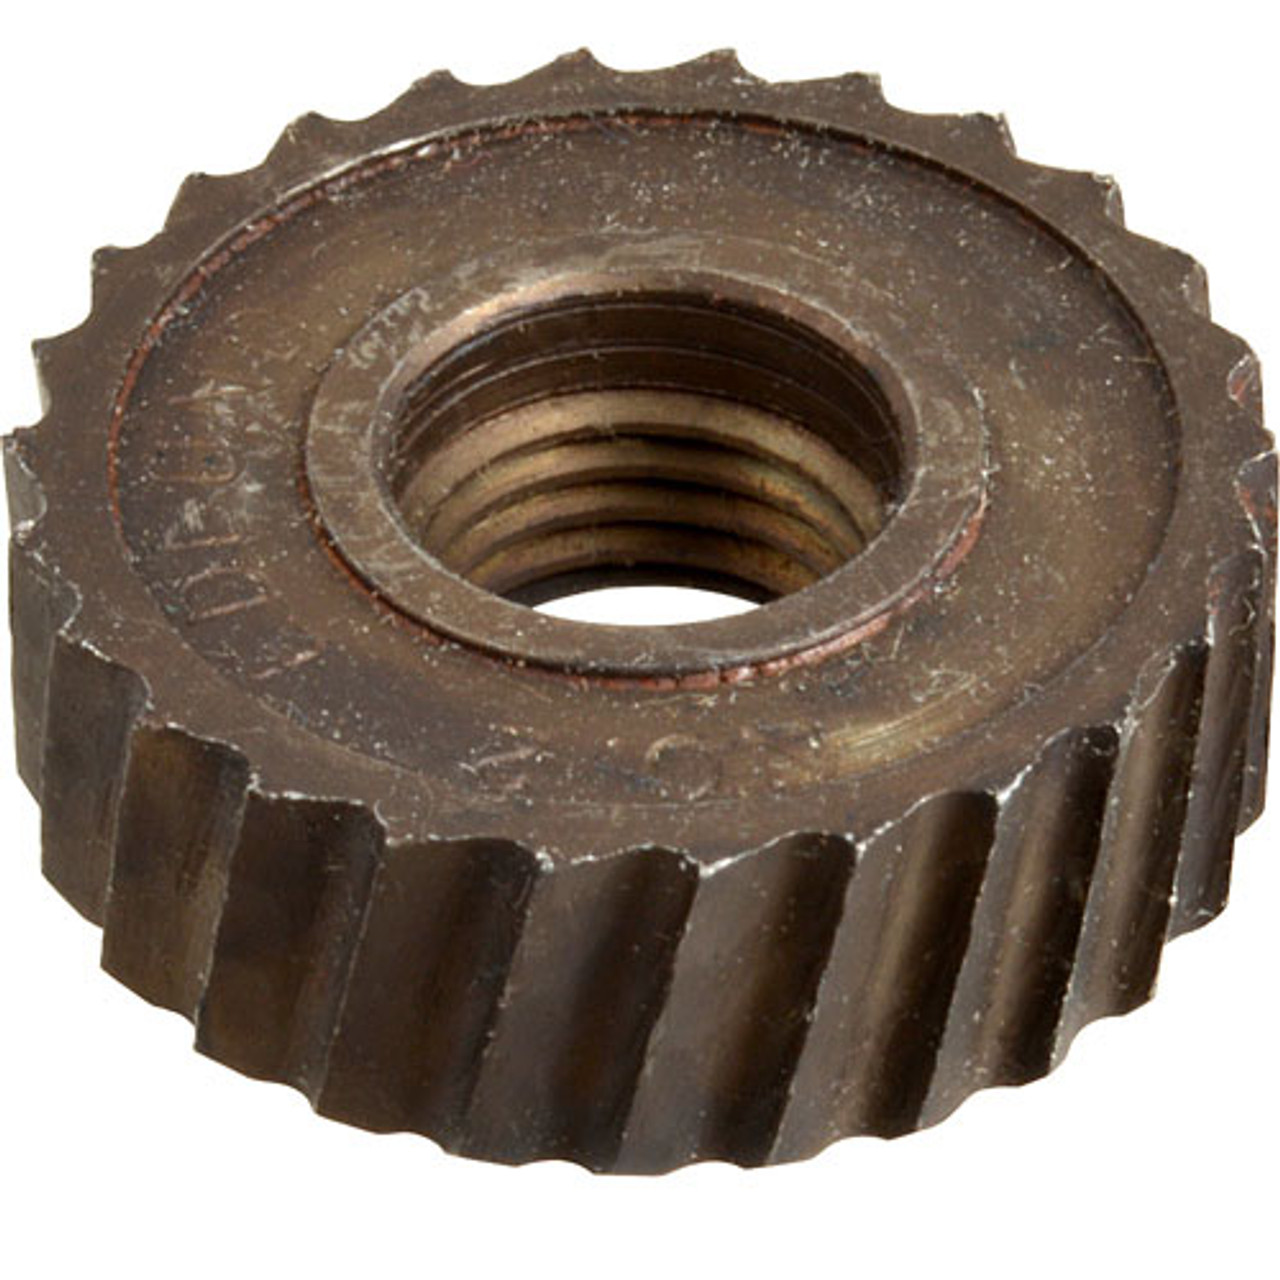 Gear,Can Opener (Edlund, No.2) - Replacement Part For Edlund G004M